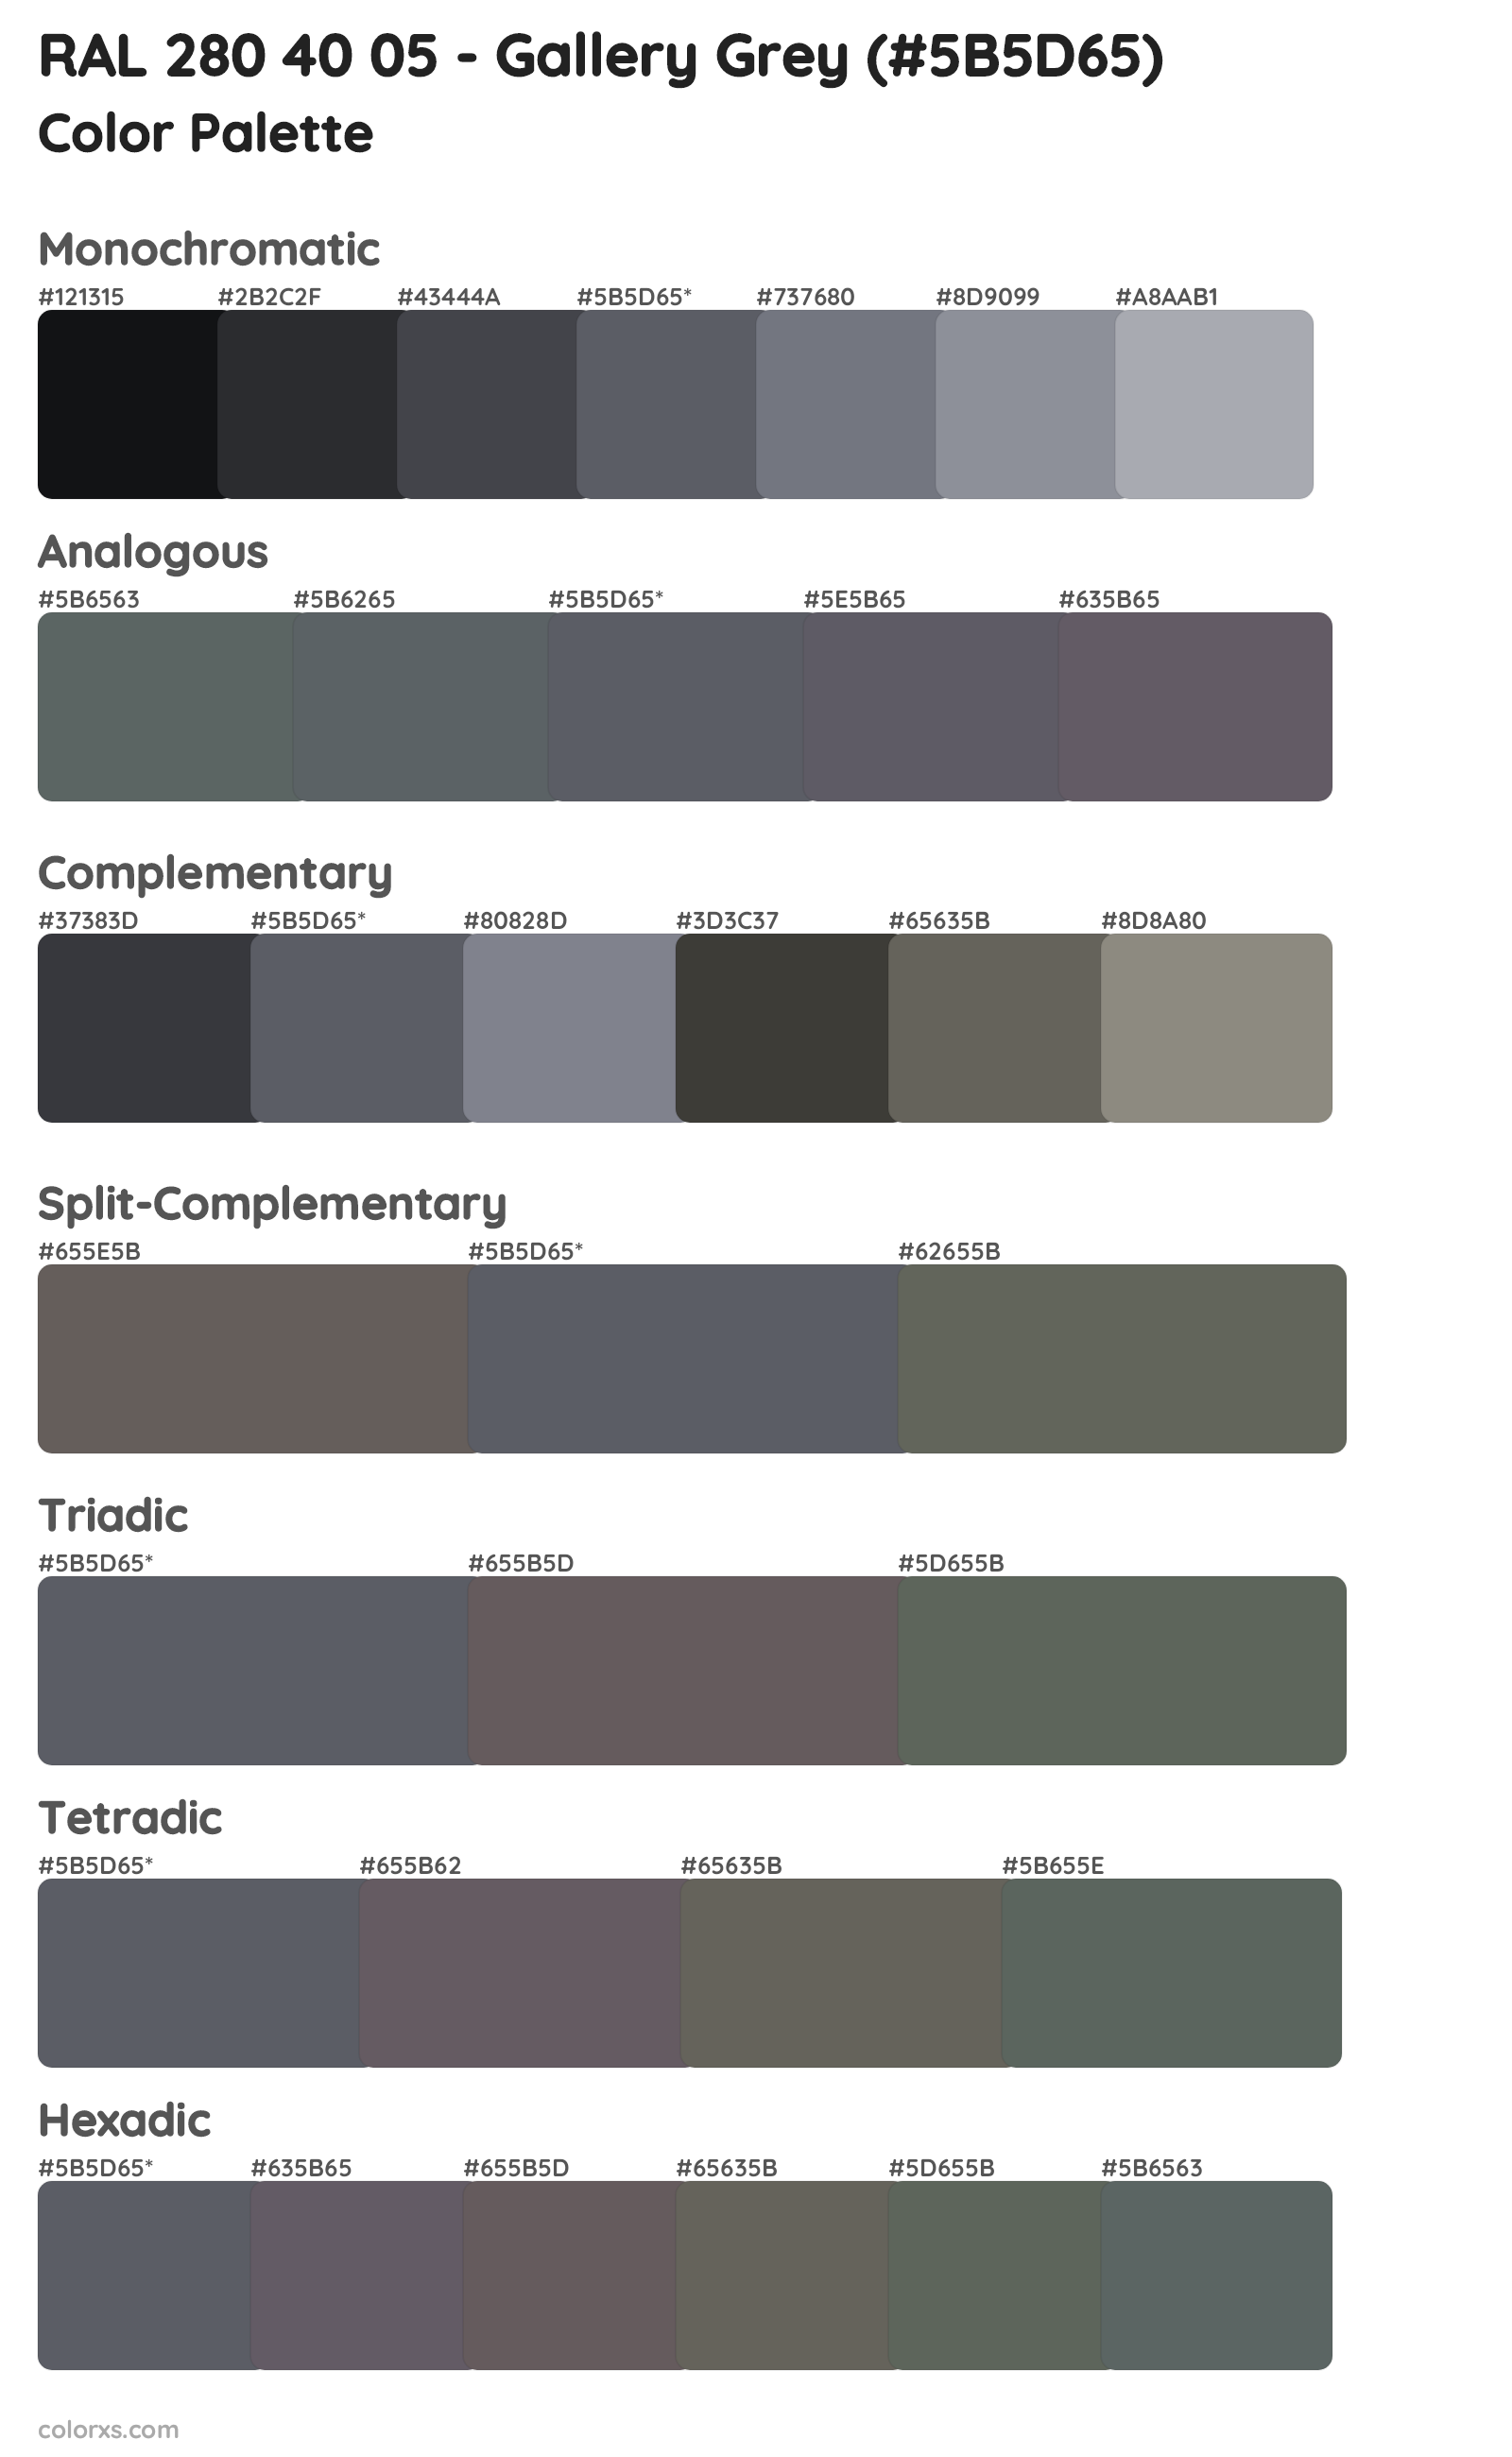 RAL 280 40 05 - Gallery Grey Color Scheme Palettes